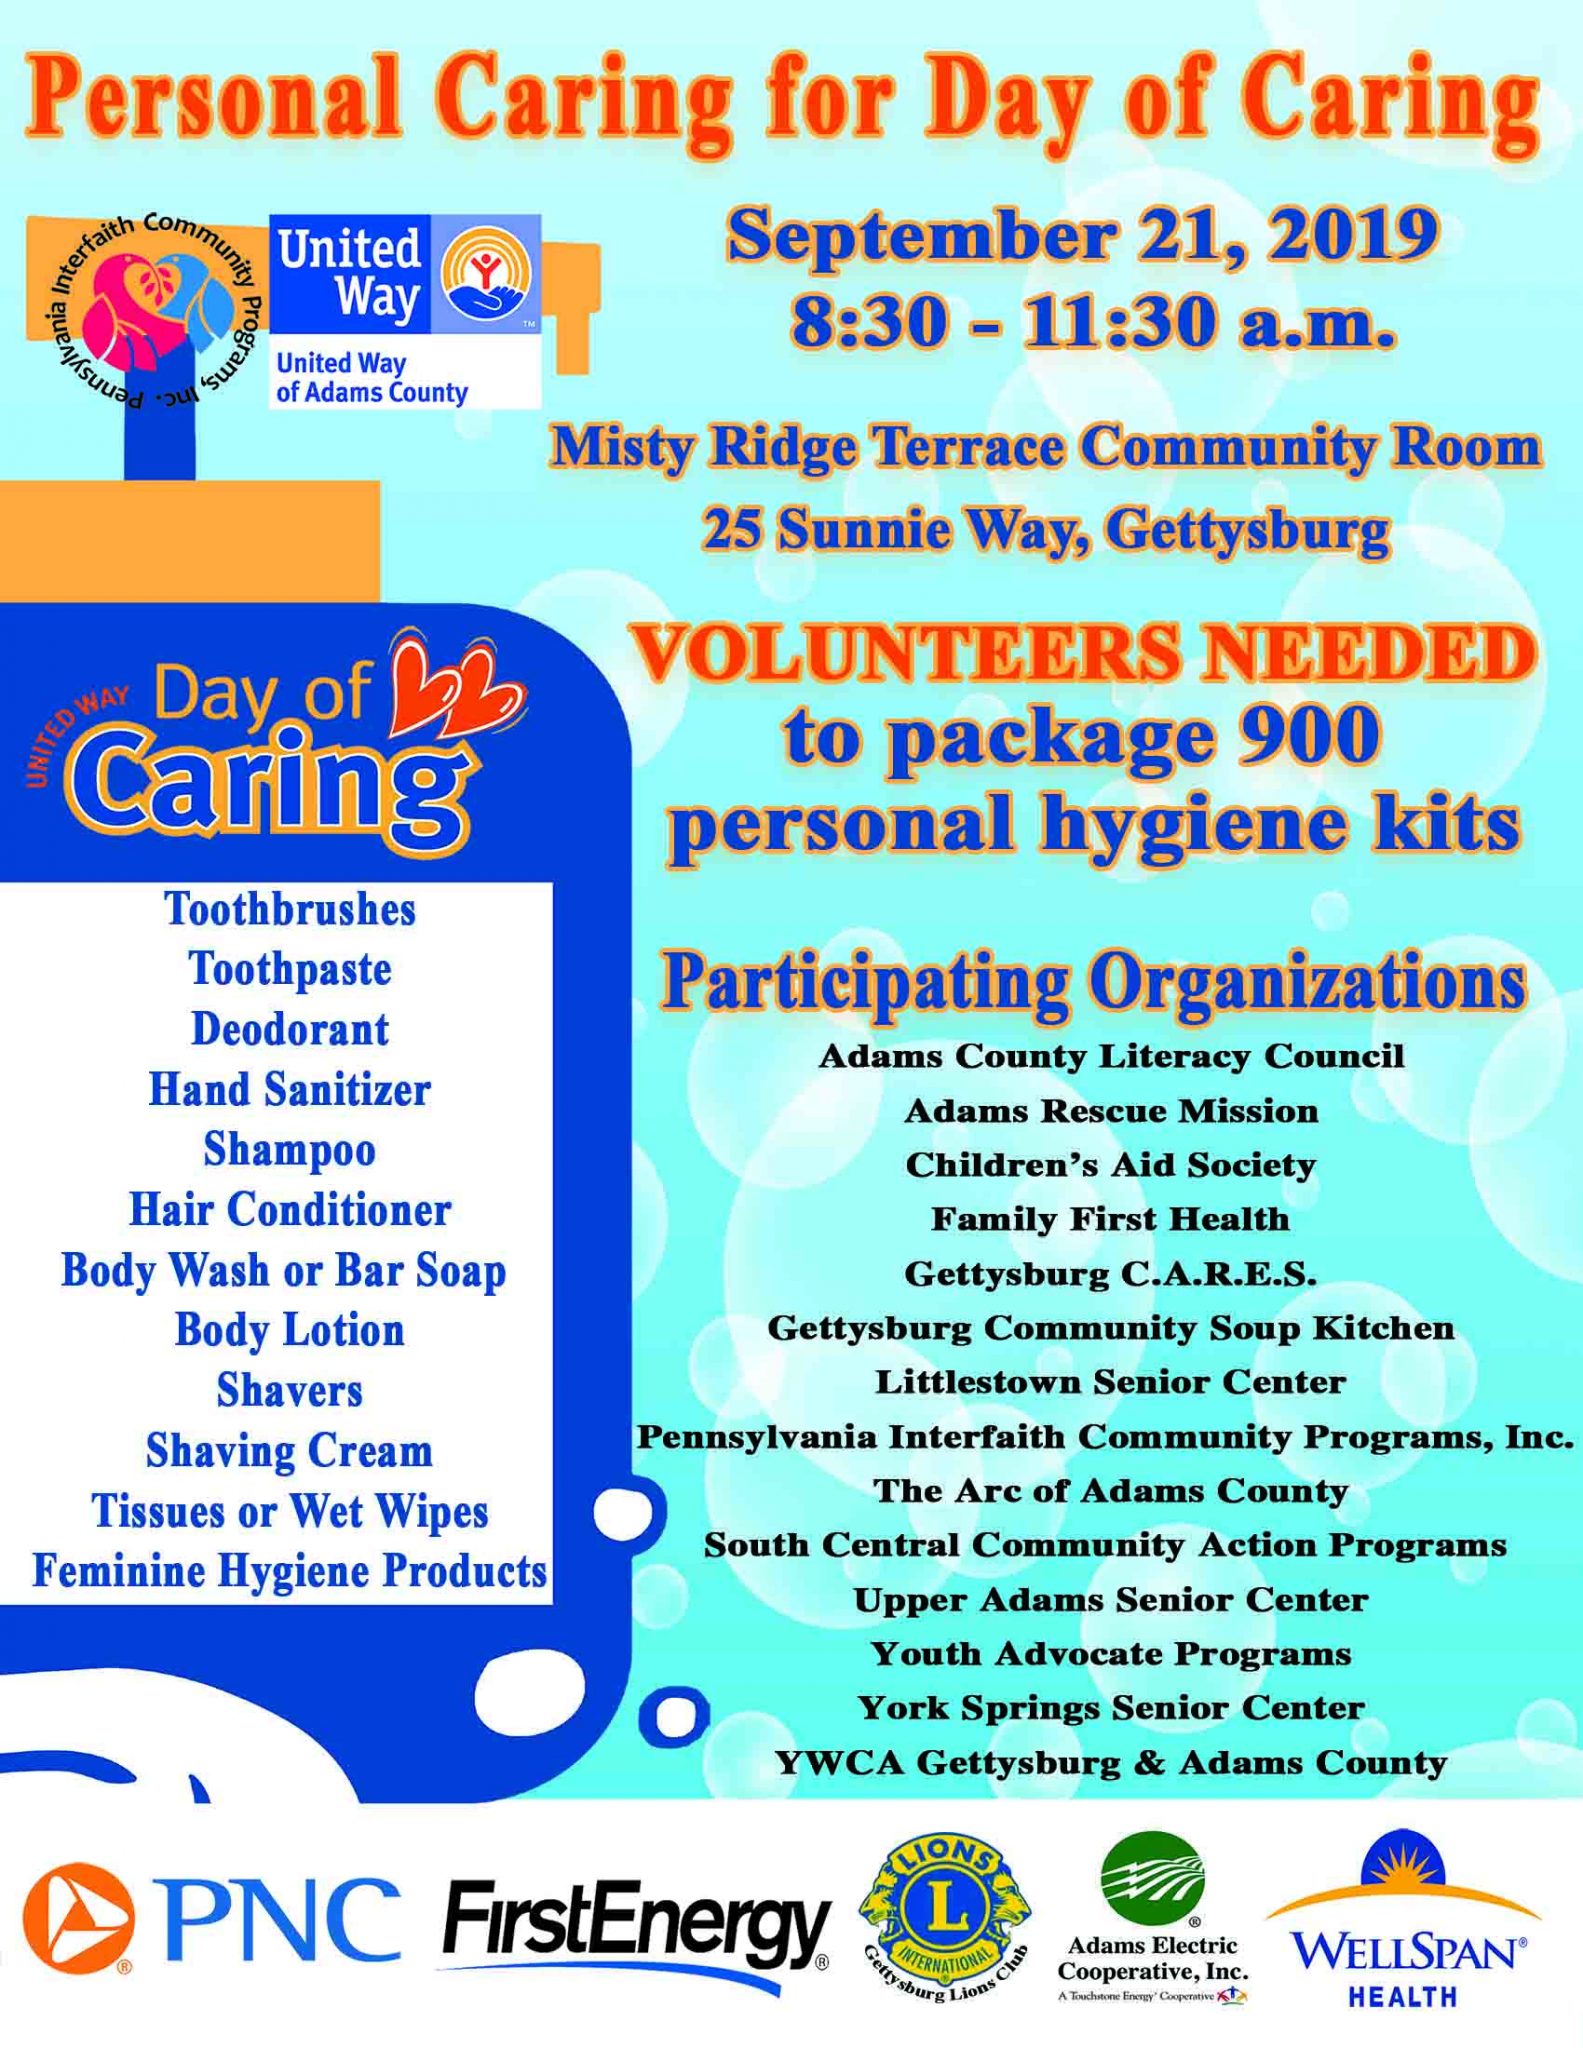 Day of Caring – United Way of Adams County